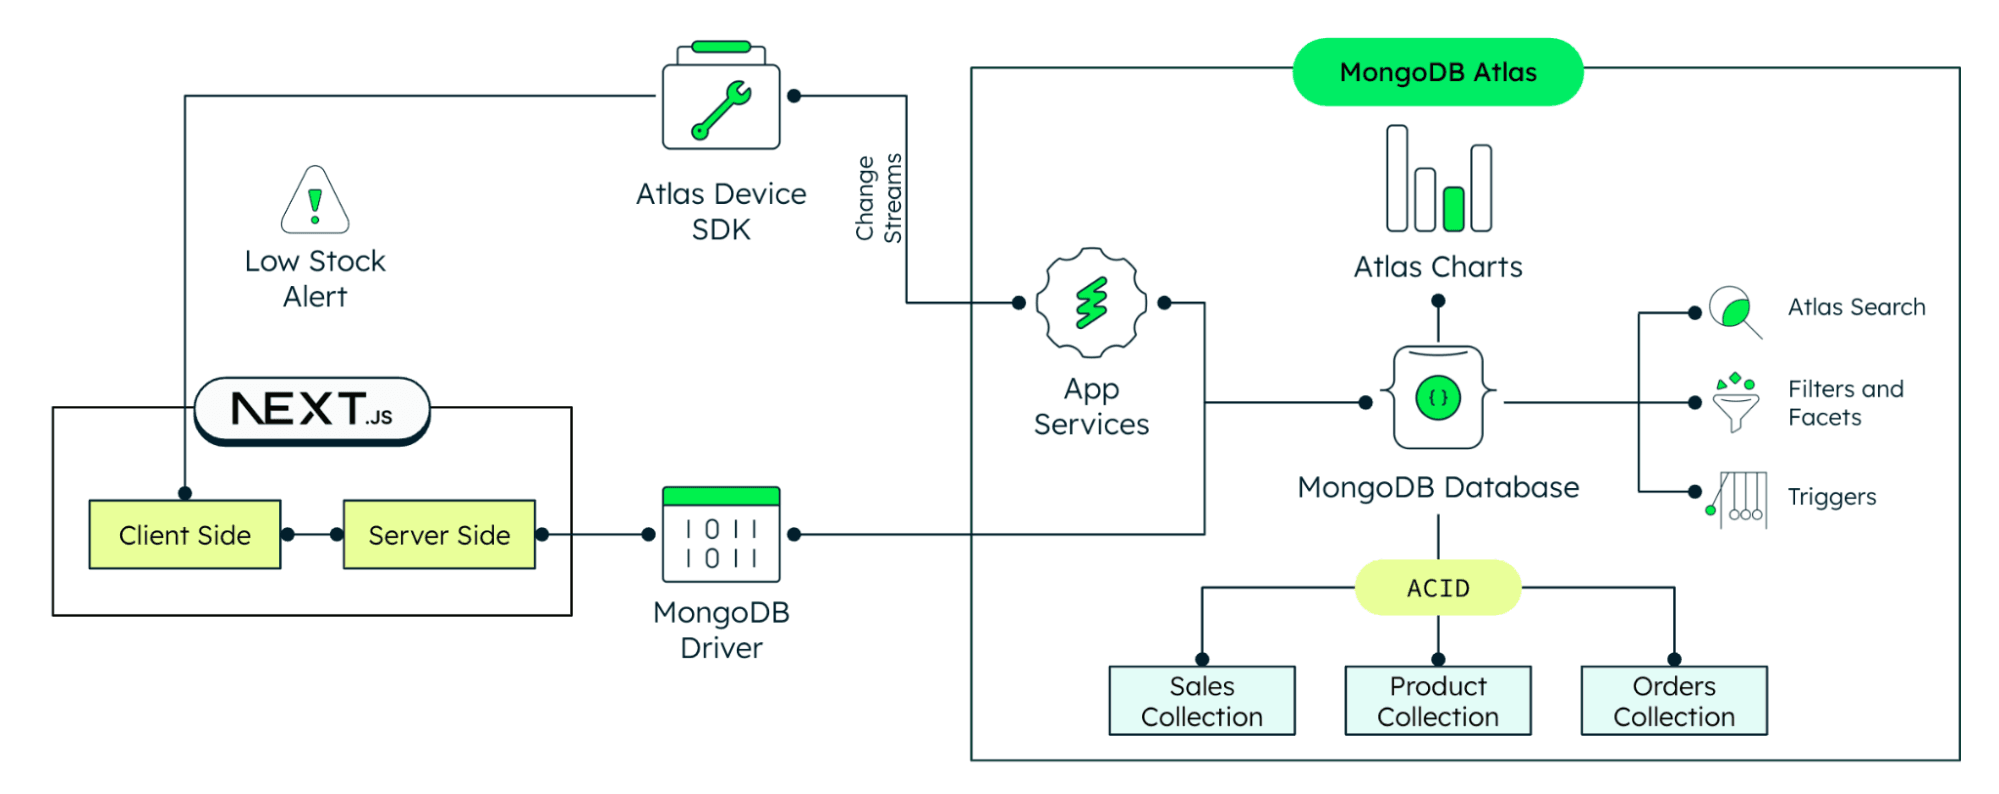 Inventory management system architecture using MongoDB Atlas and Next.js